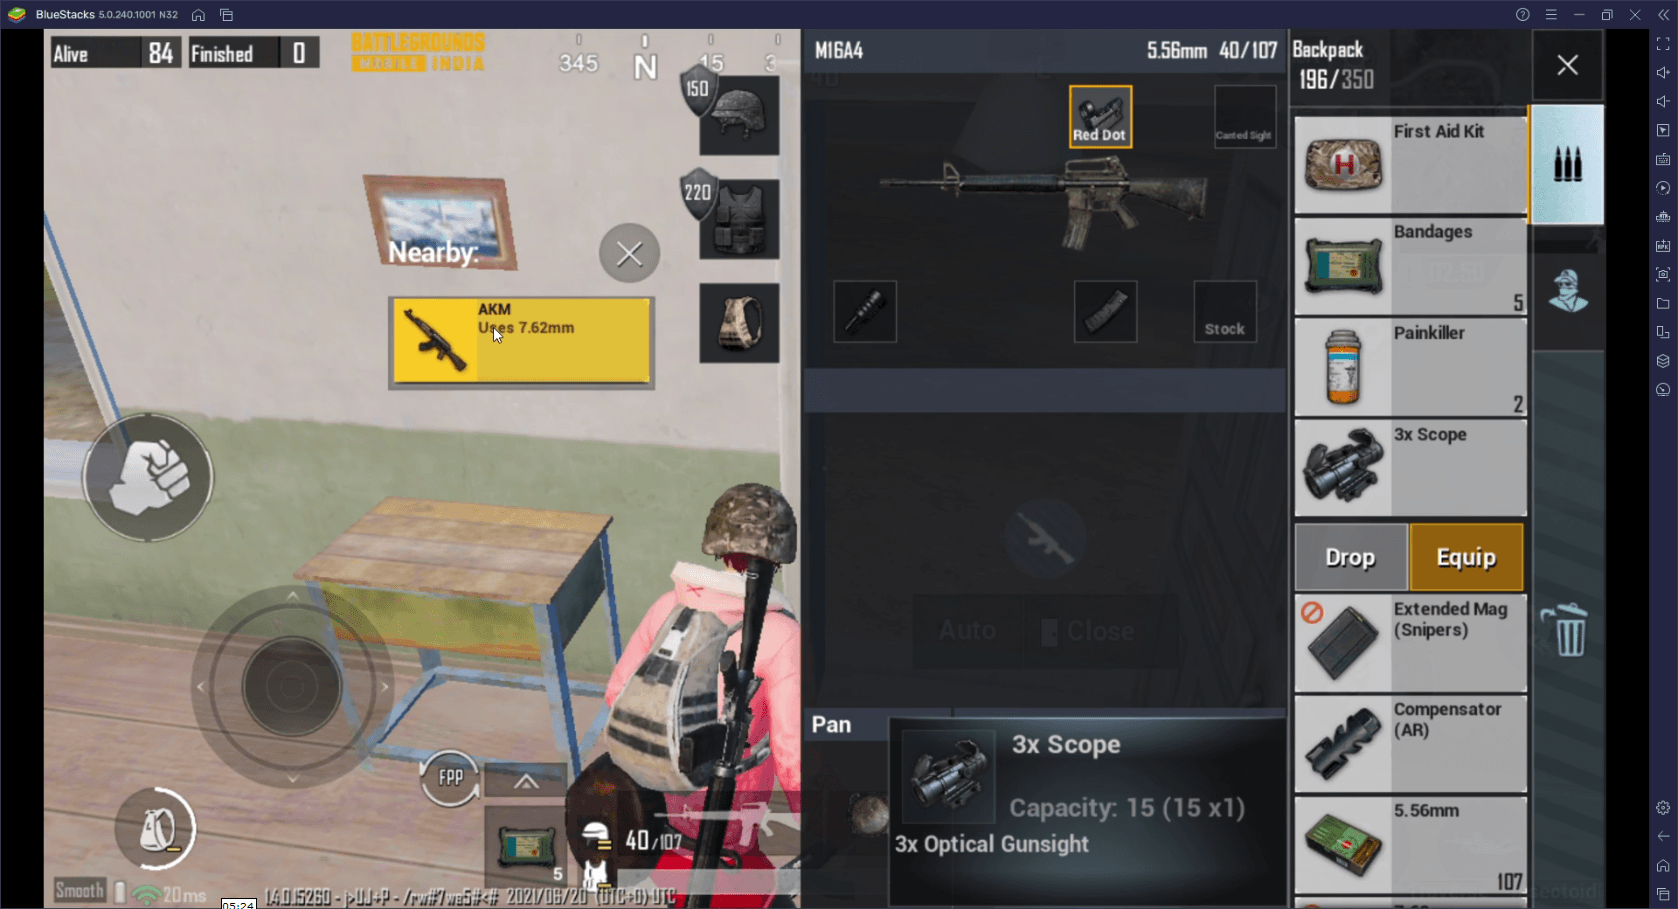 Battlegrounds Mobile India - Smart Controls Coming to BGMI with Latest BlueStacks 5 Update